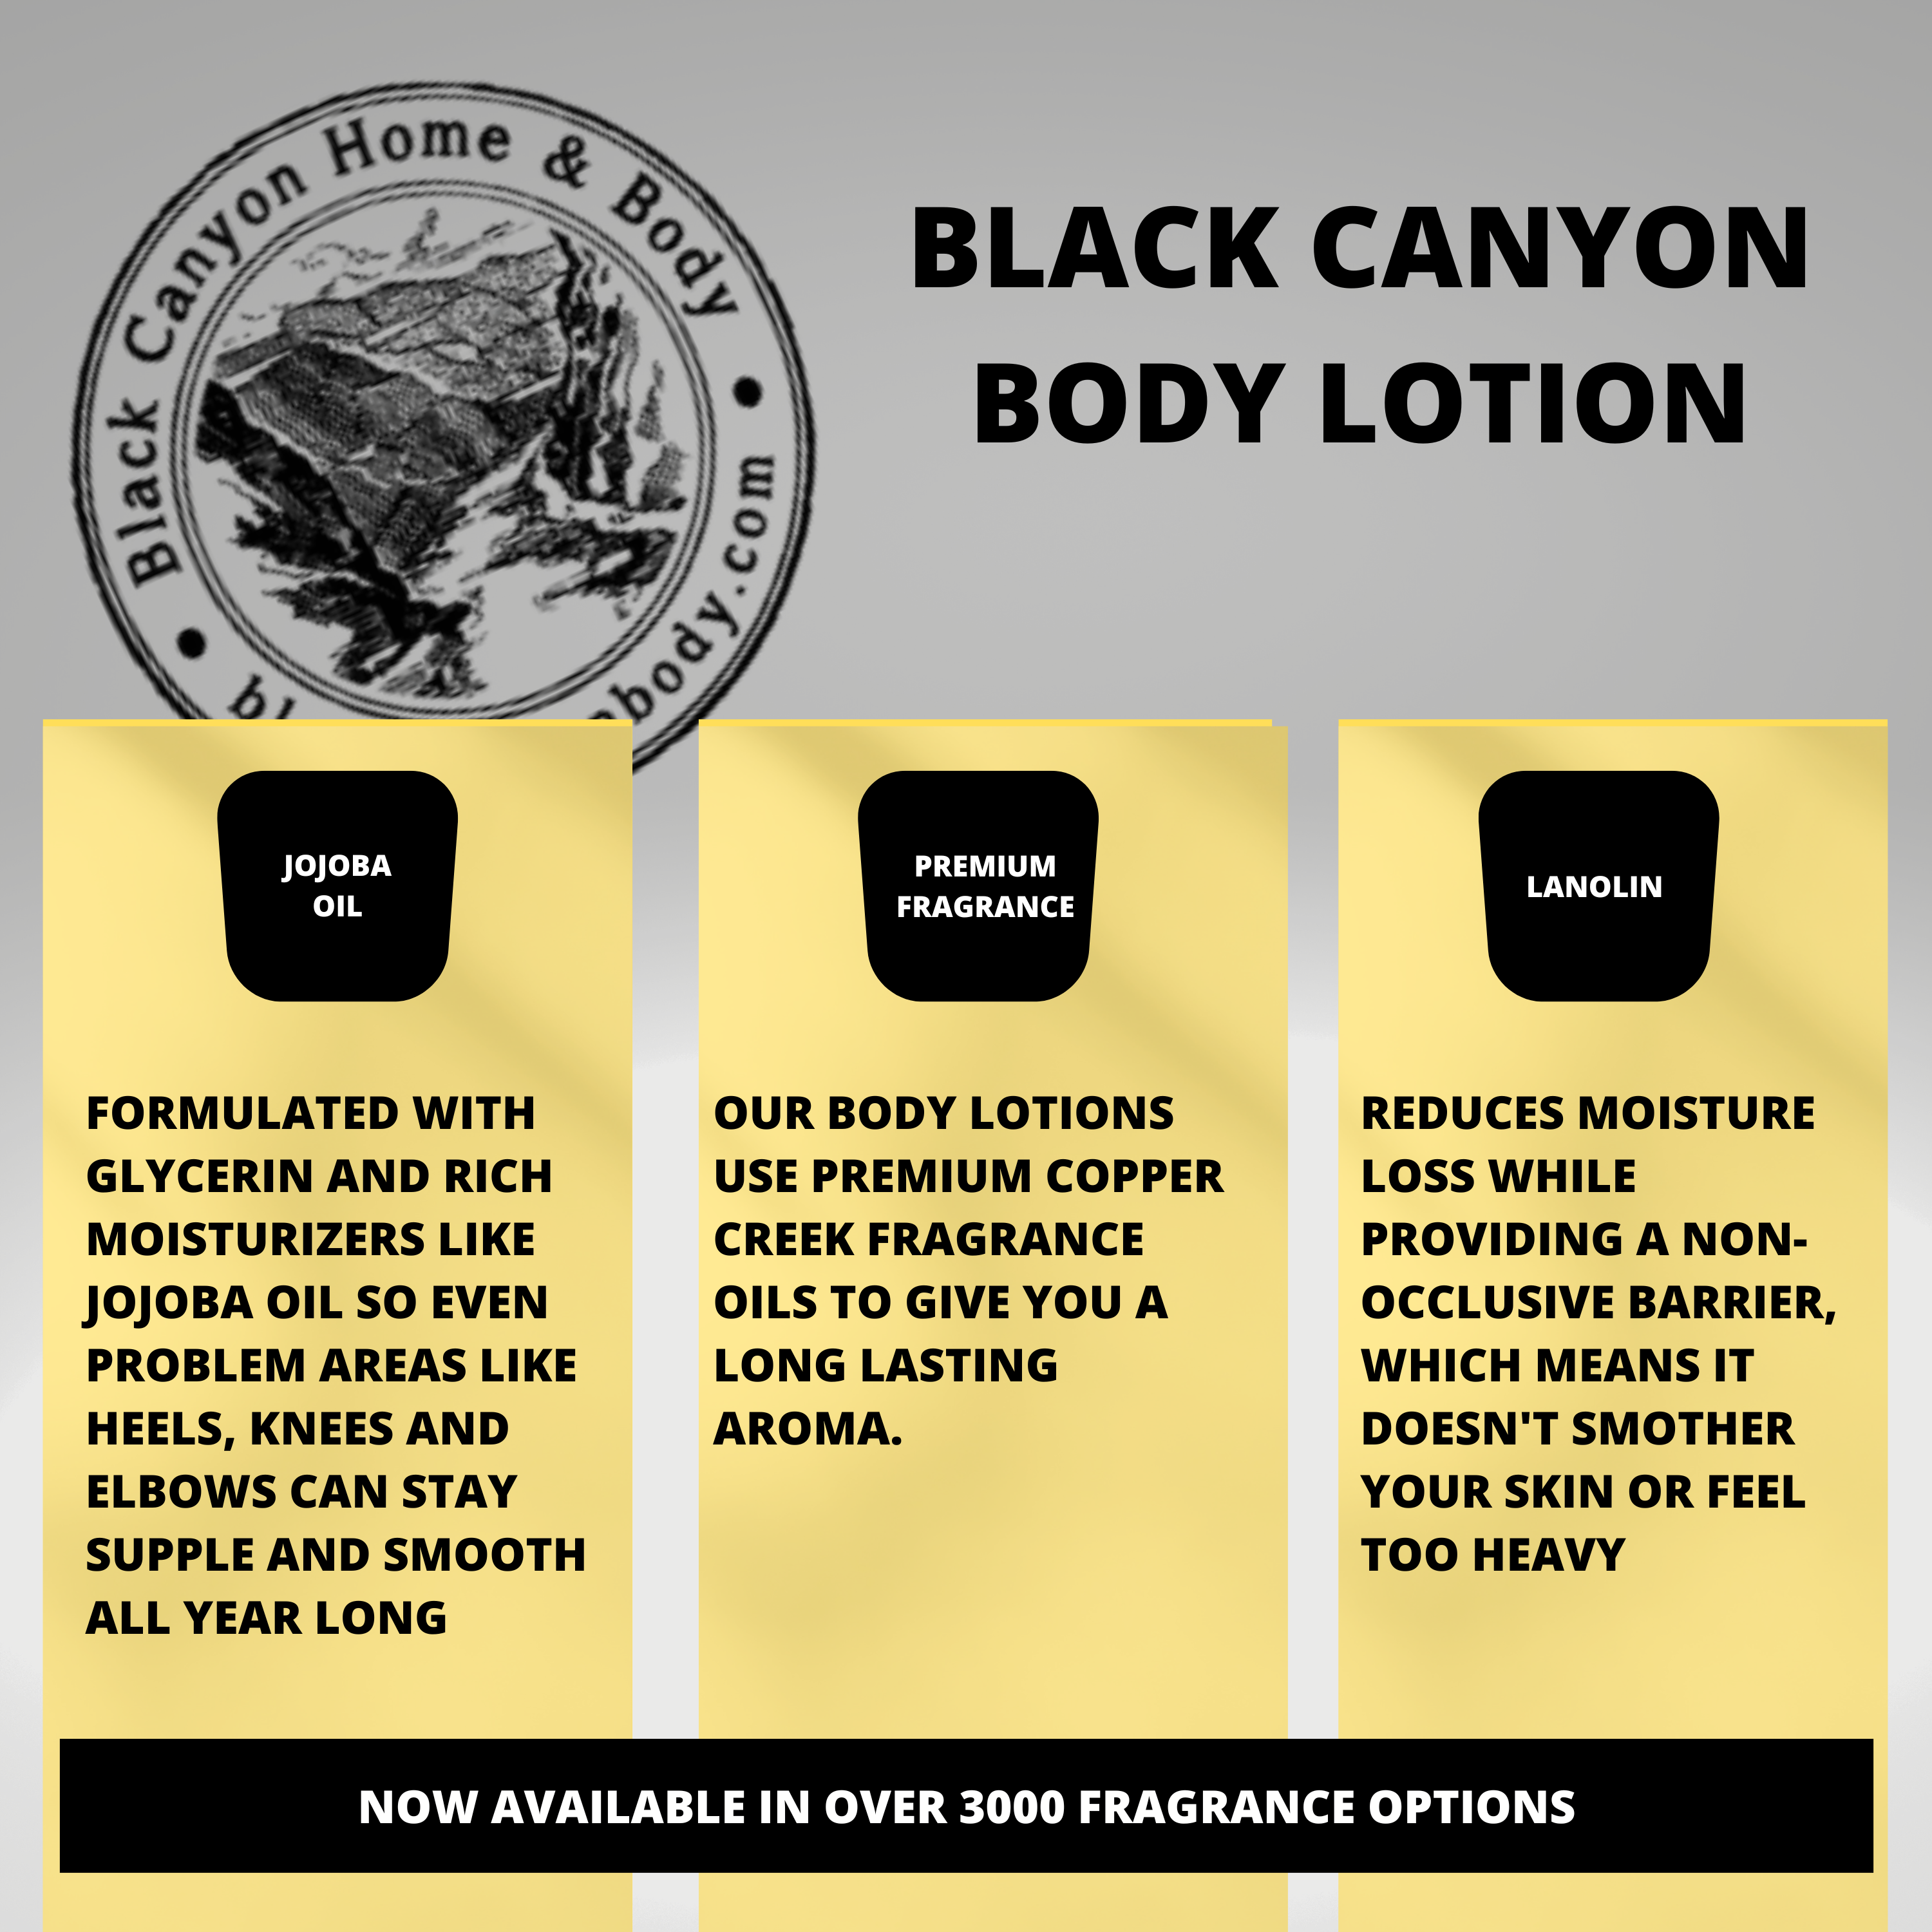 Black Canyon Winter Frost Scented Luxury Body Lotion with Lanolin and Jojoba Oil